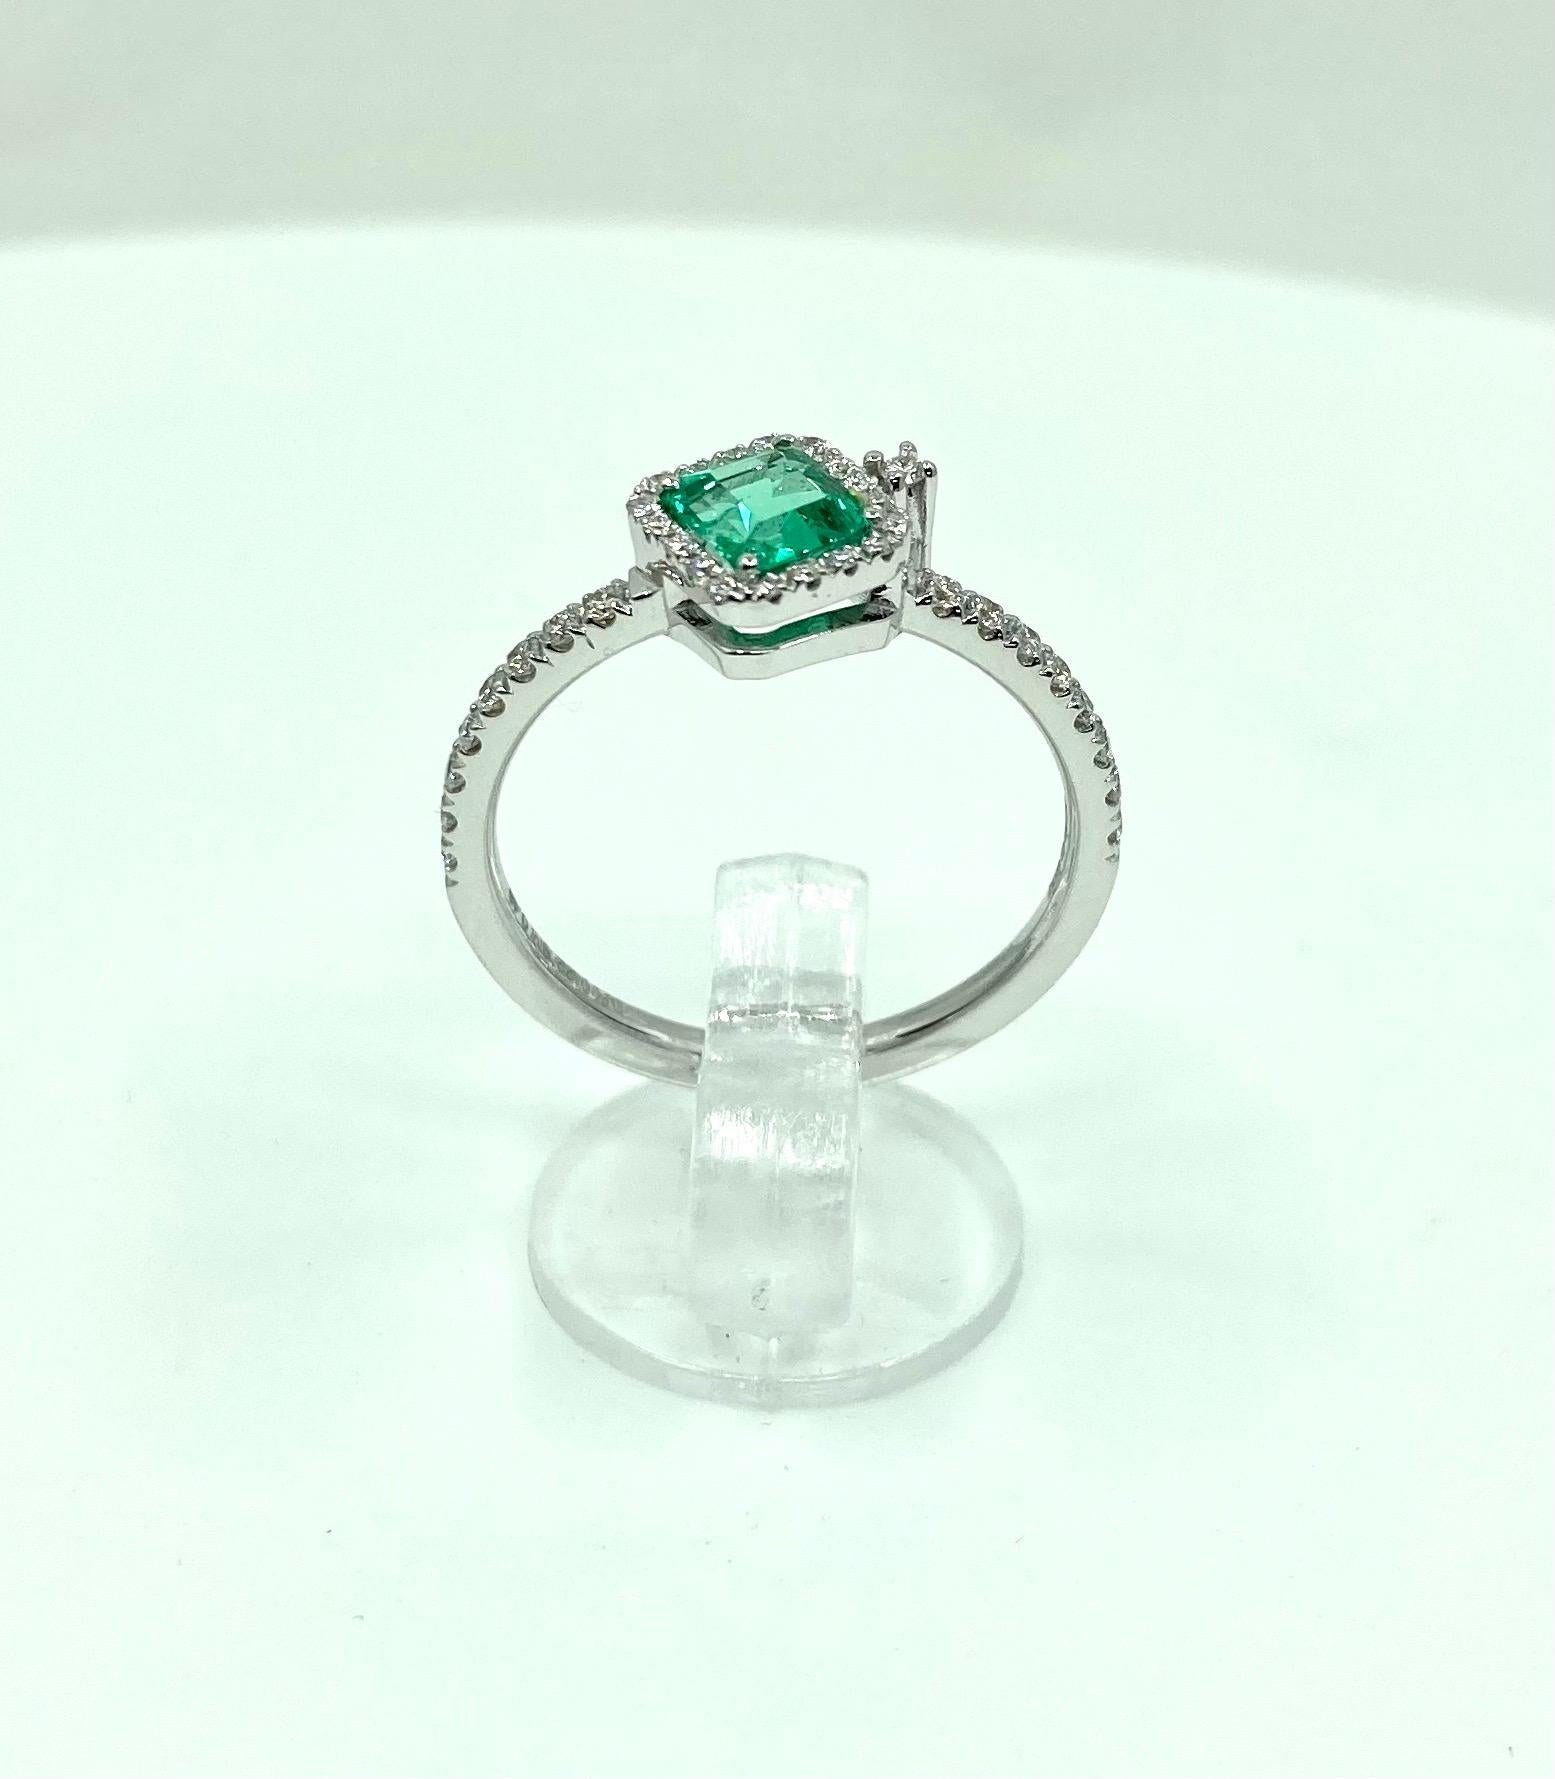 Fine white gold ring, with a central Eemerald ct. 0.44 and Diamonds ct. 0.22, handmade in Italy by Roberto Casarin.

A contemporary yet timeless design, with a lavish green emerald as the center piece. The surrounding diamonds on the edges add a